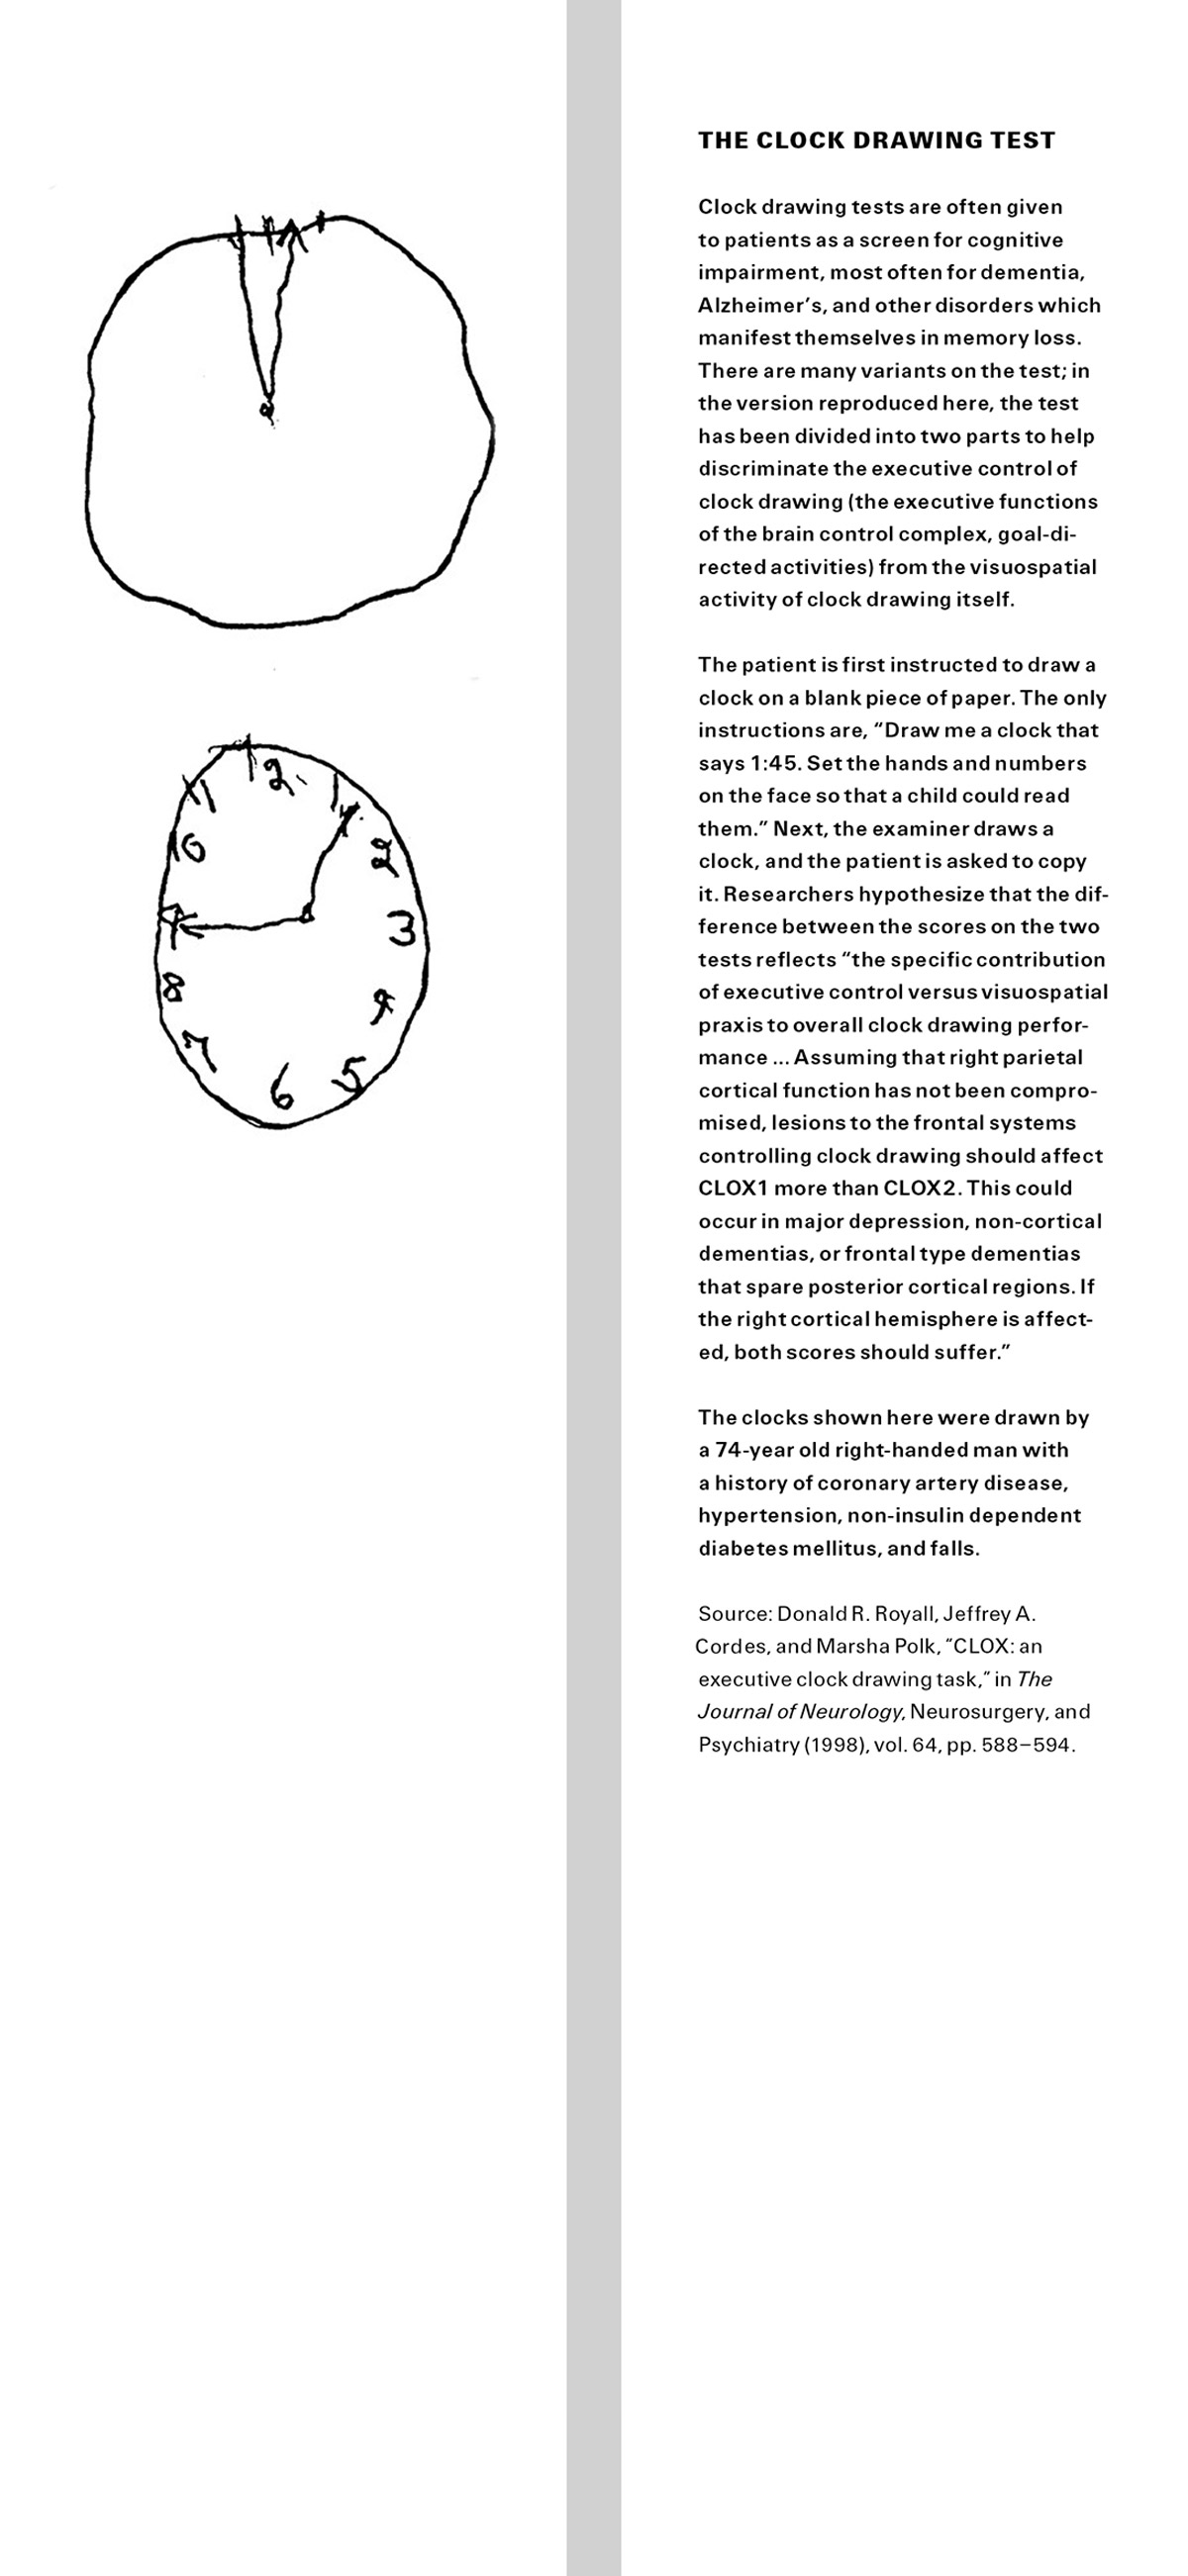 The front and back of this issue’s bookmark. The front shows two clocks drawn in a shaky hand. The back reads: “The Clock Drawing Test. Clock drawing tests are often given to patients as a screen for cognitive impairment, most often for dementia, Alzheimer’s, and other disorders which manifest themselves in memory loss. There are many variants on the test; in the version reproduced here, the test has been divided into two parts to help discriminate the executive control of clock drawing (the executive functions of the brain control complex, goal-directed activities) from the visuospatial activity of clock drawing itself. The patient is first instructed to draw a clock on a blank piece of paper. The only instructions are, “Draw me a clock that says 1:45. Set the hands and numbers on the face so that a child could read them.” Next, the examiner draws a clock, and the patient is asked to copy it. Researchers hypothesize that the difference between the scores on the two tests reflects “the specific contribution of executive control versus visuospatial praxis to overall clock drawing performance … Assuming that right parietal cortical function has not been compromised, lesions to the frontal systems controlling clock drawing should affect CLOX1 more than CLOX2. This could occur in major depression, non-cortical dementias, or frontal type dementias that spare posterior cortical regions. If the right cortical hemisphere is affected, both scores should suffer.” The clocks shown here were drawn by a 74-year old right-handed man with a history of coronary artery disease, hypertension, non-insulin dependent diabetes mellitus, and falls. Source: Donald R. Royall, Jeffrey A. Cordes, and Marsha Polk, “CLOX: an executive clock drawing task,” in The Journal of Neurology, Neurosurgery, and Psychiatry (1998), vol. 64, pp. 588–594.”